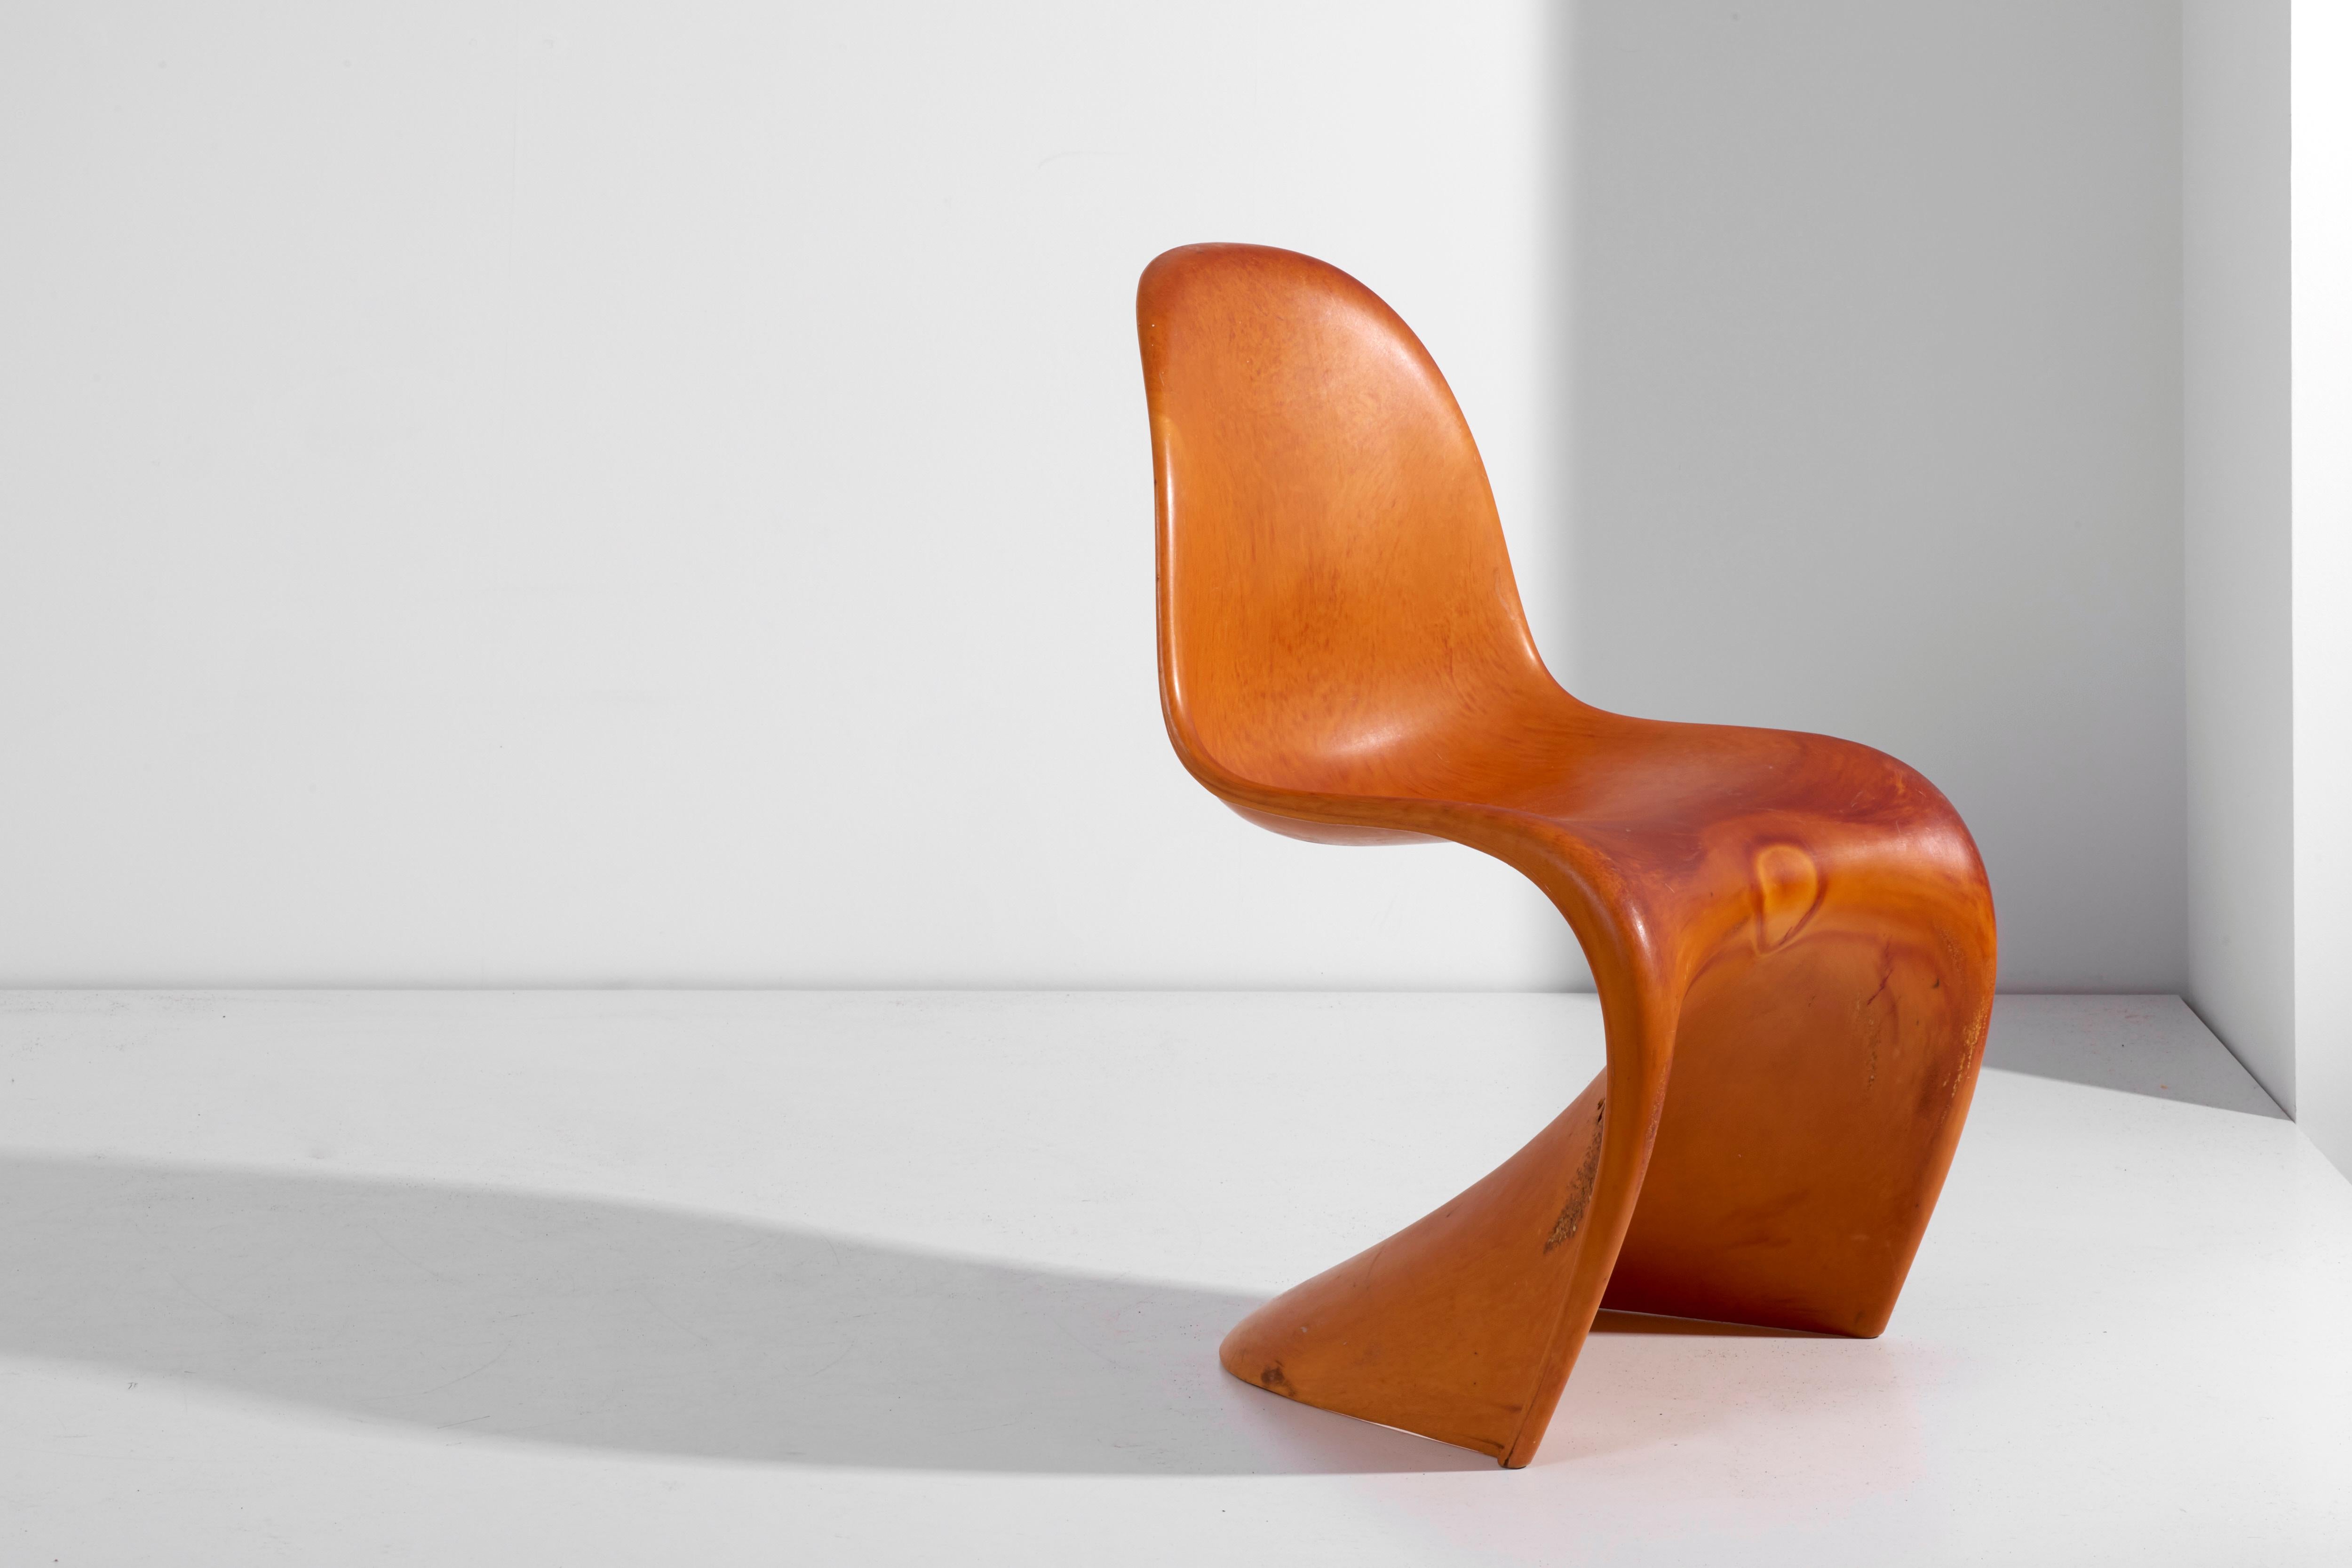 Workpiece of the famous Panton chair. Designed by Verner Panton and produced circa 1968 by Vitra Design in Germany. Made of orange/brown polyurethane foam (Baydur, Duroplast), structured and not lacquered.

Blank from the test phase prior to